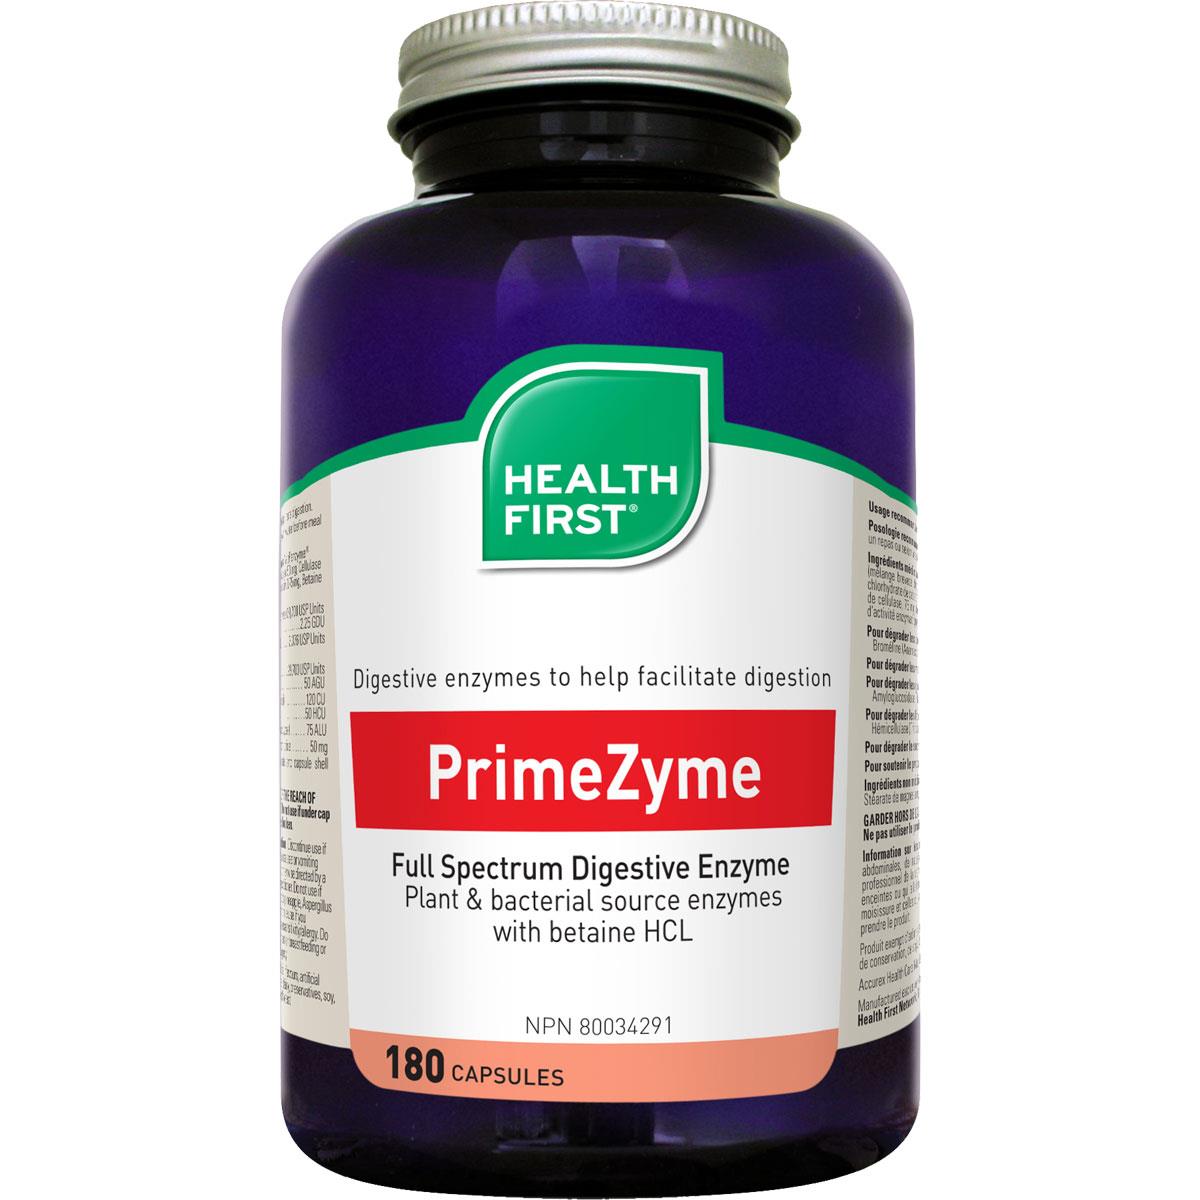 Health First PrimeZyme Full Specturm Digestive Enzymes, 180 Caps